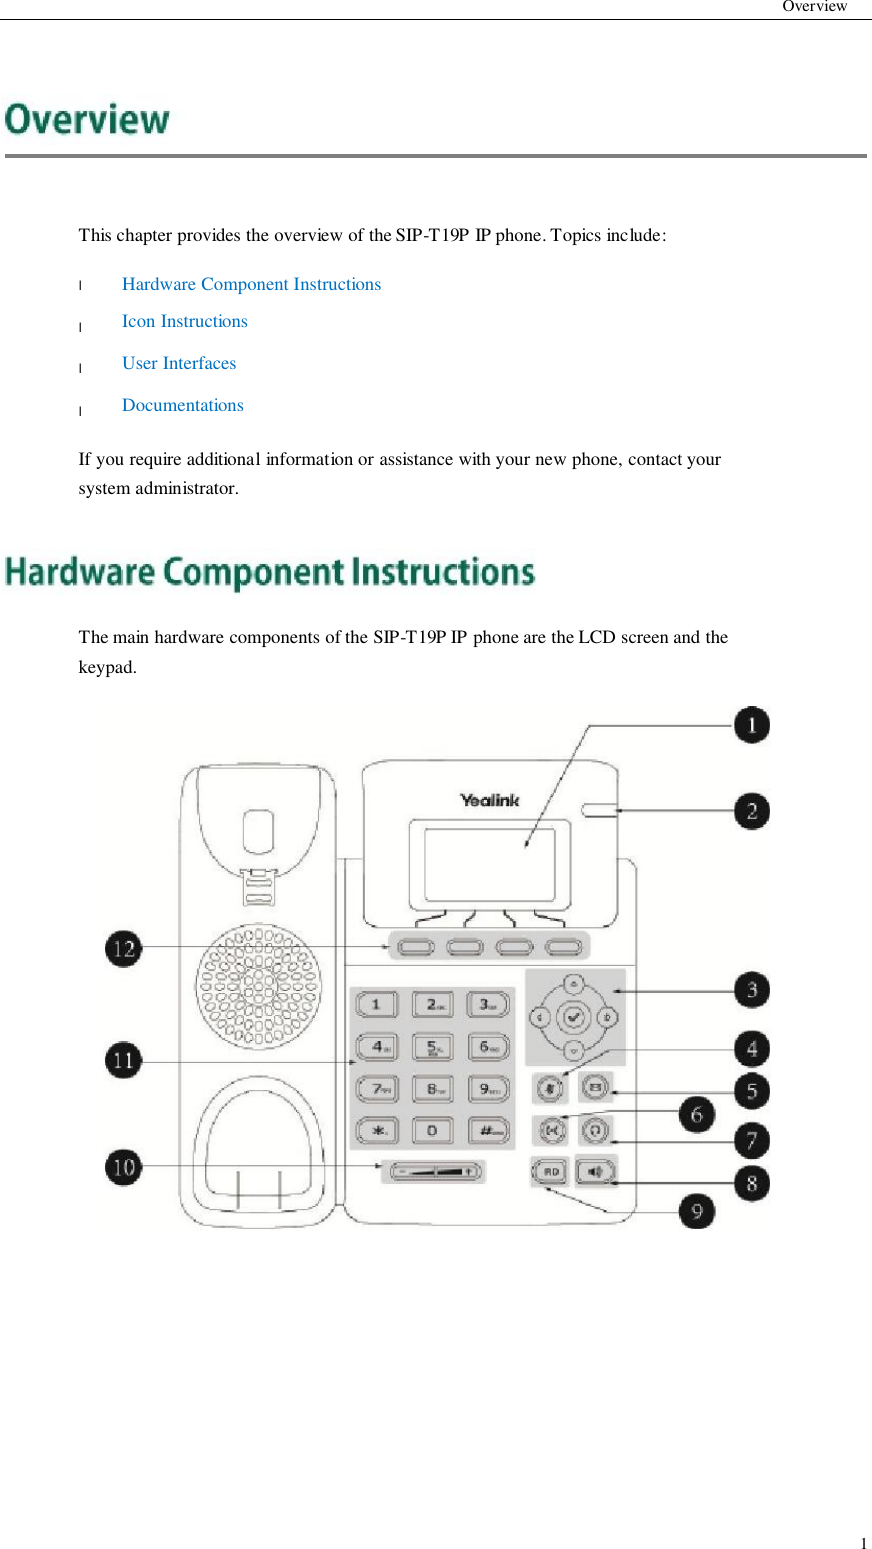           Overview          This chapter provides the overview of the SIP-T19P IP phone. Topics include:  l  l  l  l  Hardware Component Instructions Icon Instructions User Interfaces Documentations  If you require additional information or assistance with your new phone, contact your system administrator.      The main hardware components of the SIP-T19P IP phone are the LCD screen and the keypad.                                         1